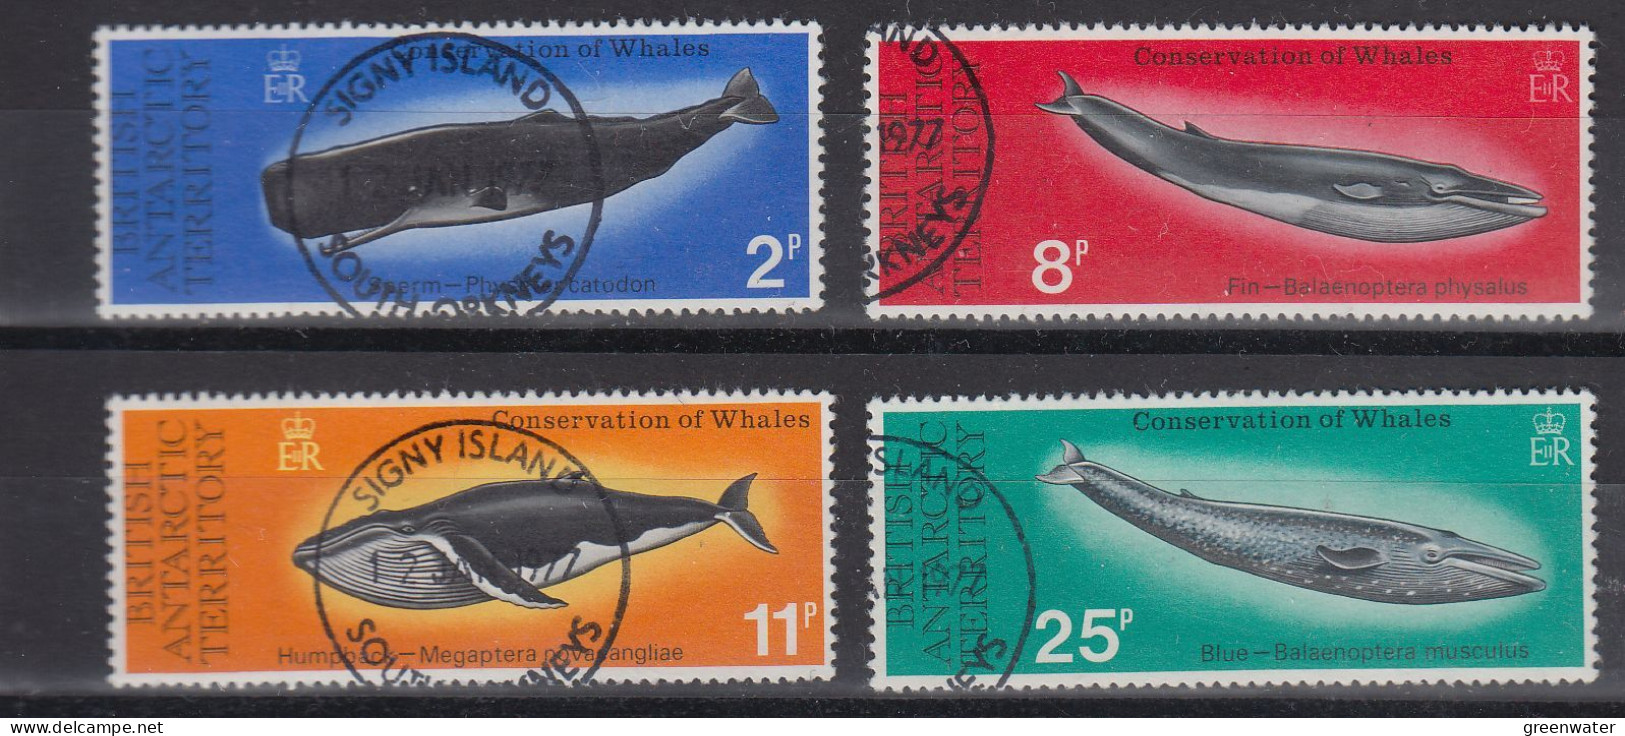 British Antarctic Territorry (BAT) 1977 Whale Conservation 4v Used "Signy Island"  (58711) - Oblitérés